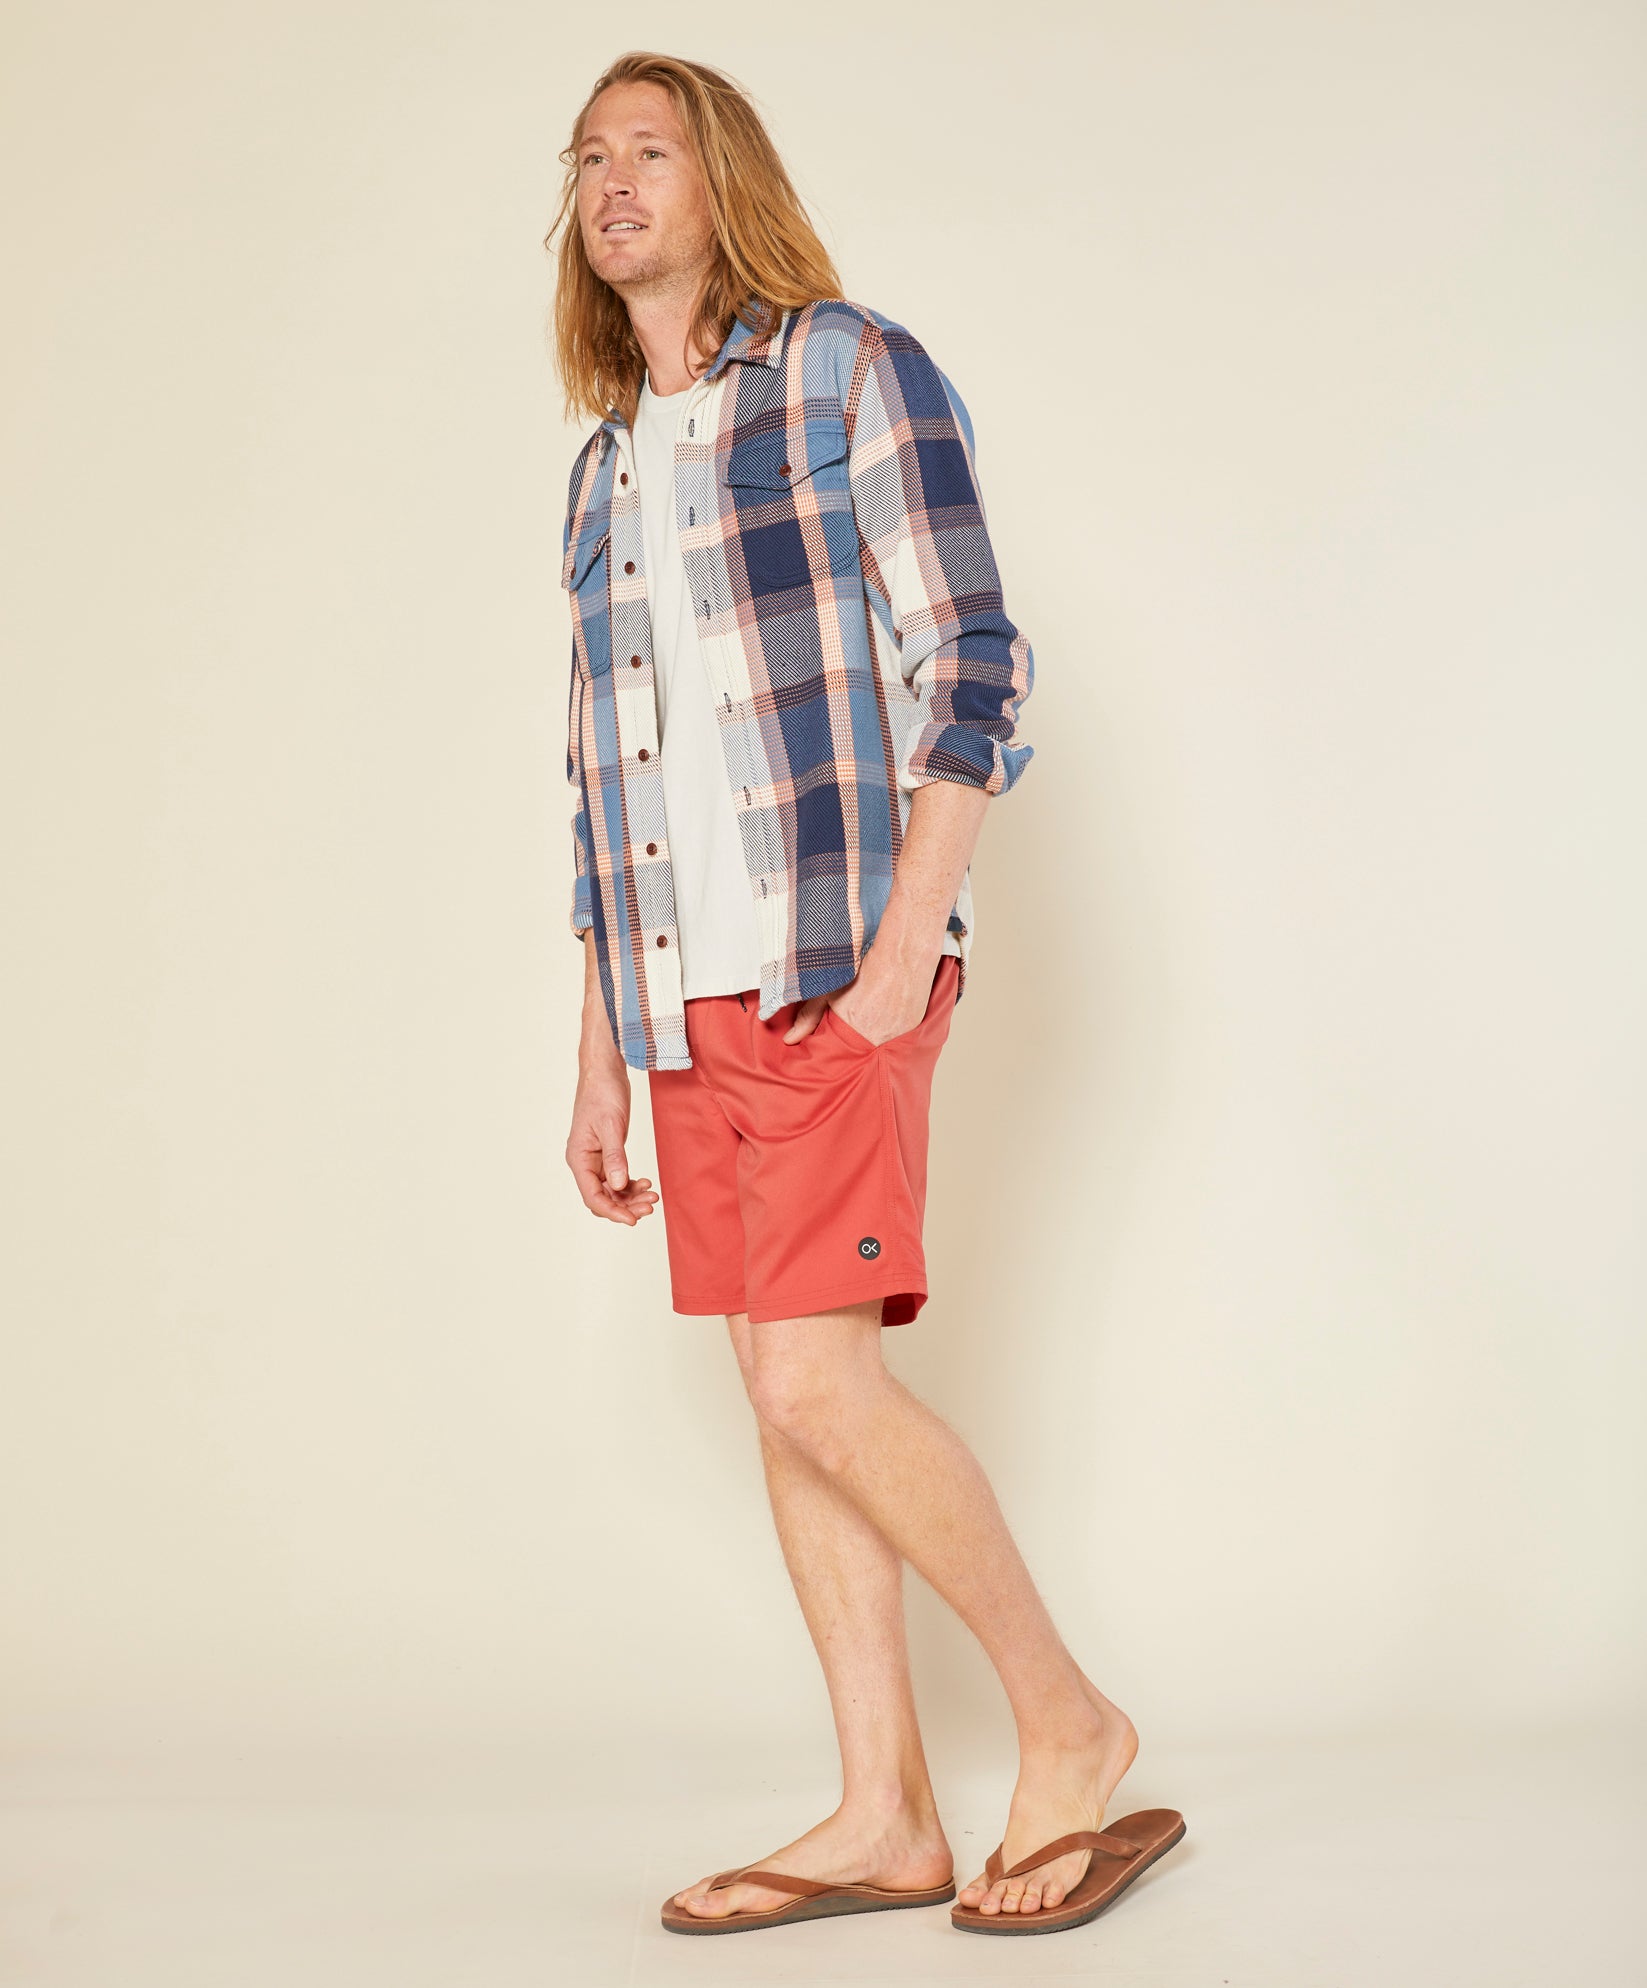 Nomadic swim shorts | Outerknown - Outlet